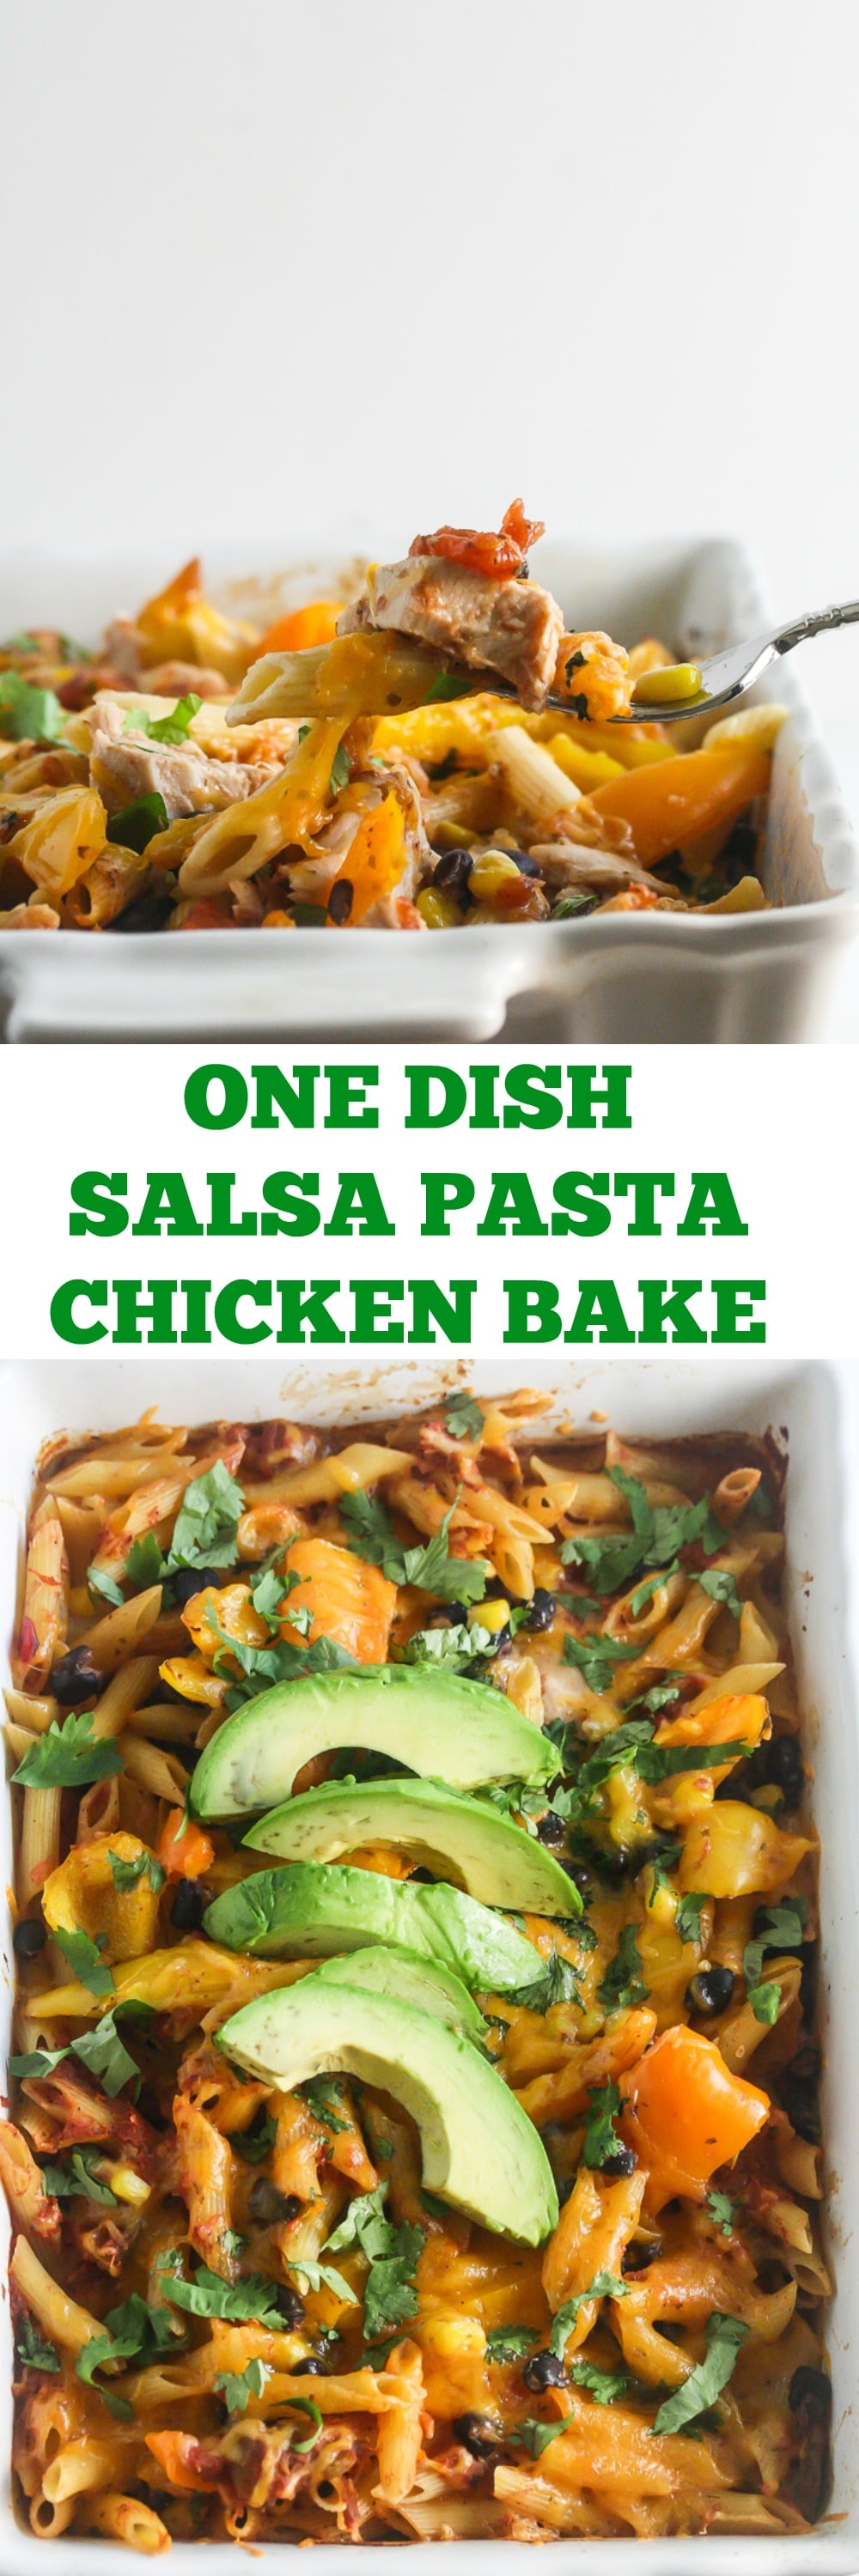 This One Dish Salsa Pasta Chicken Bake takes less than 10 minutes to prepare and the pasta doesn't need to be cooked before hand. It's not only simple to make, but also healthy and delicious! From Lauren Kelly Nutrition #OrganicforAll